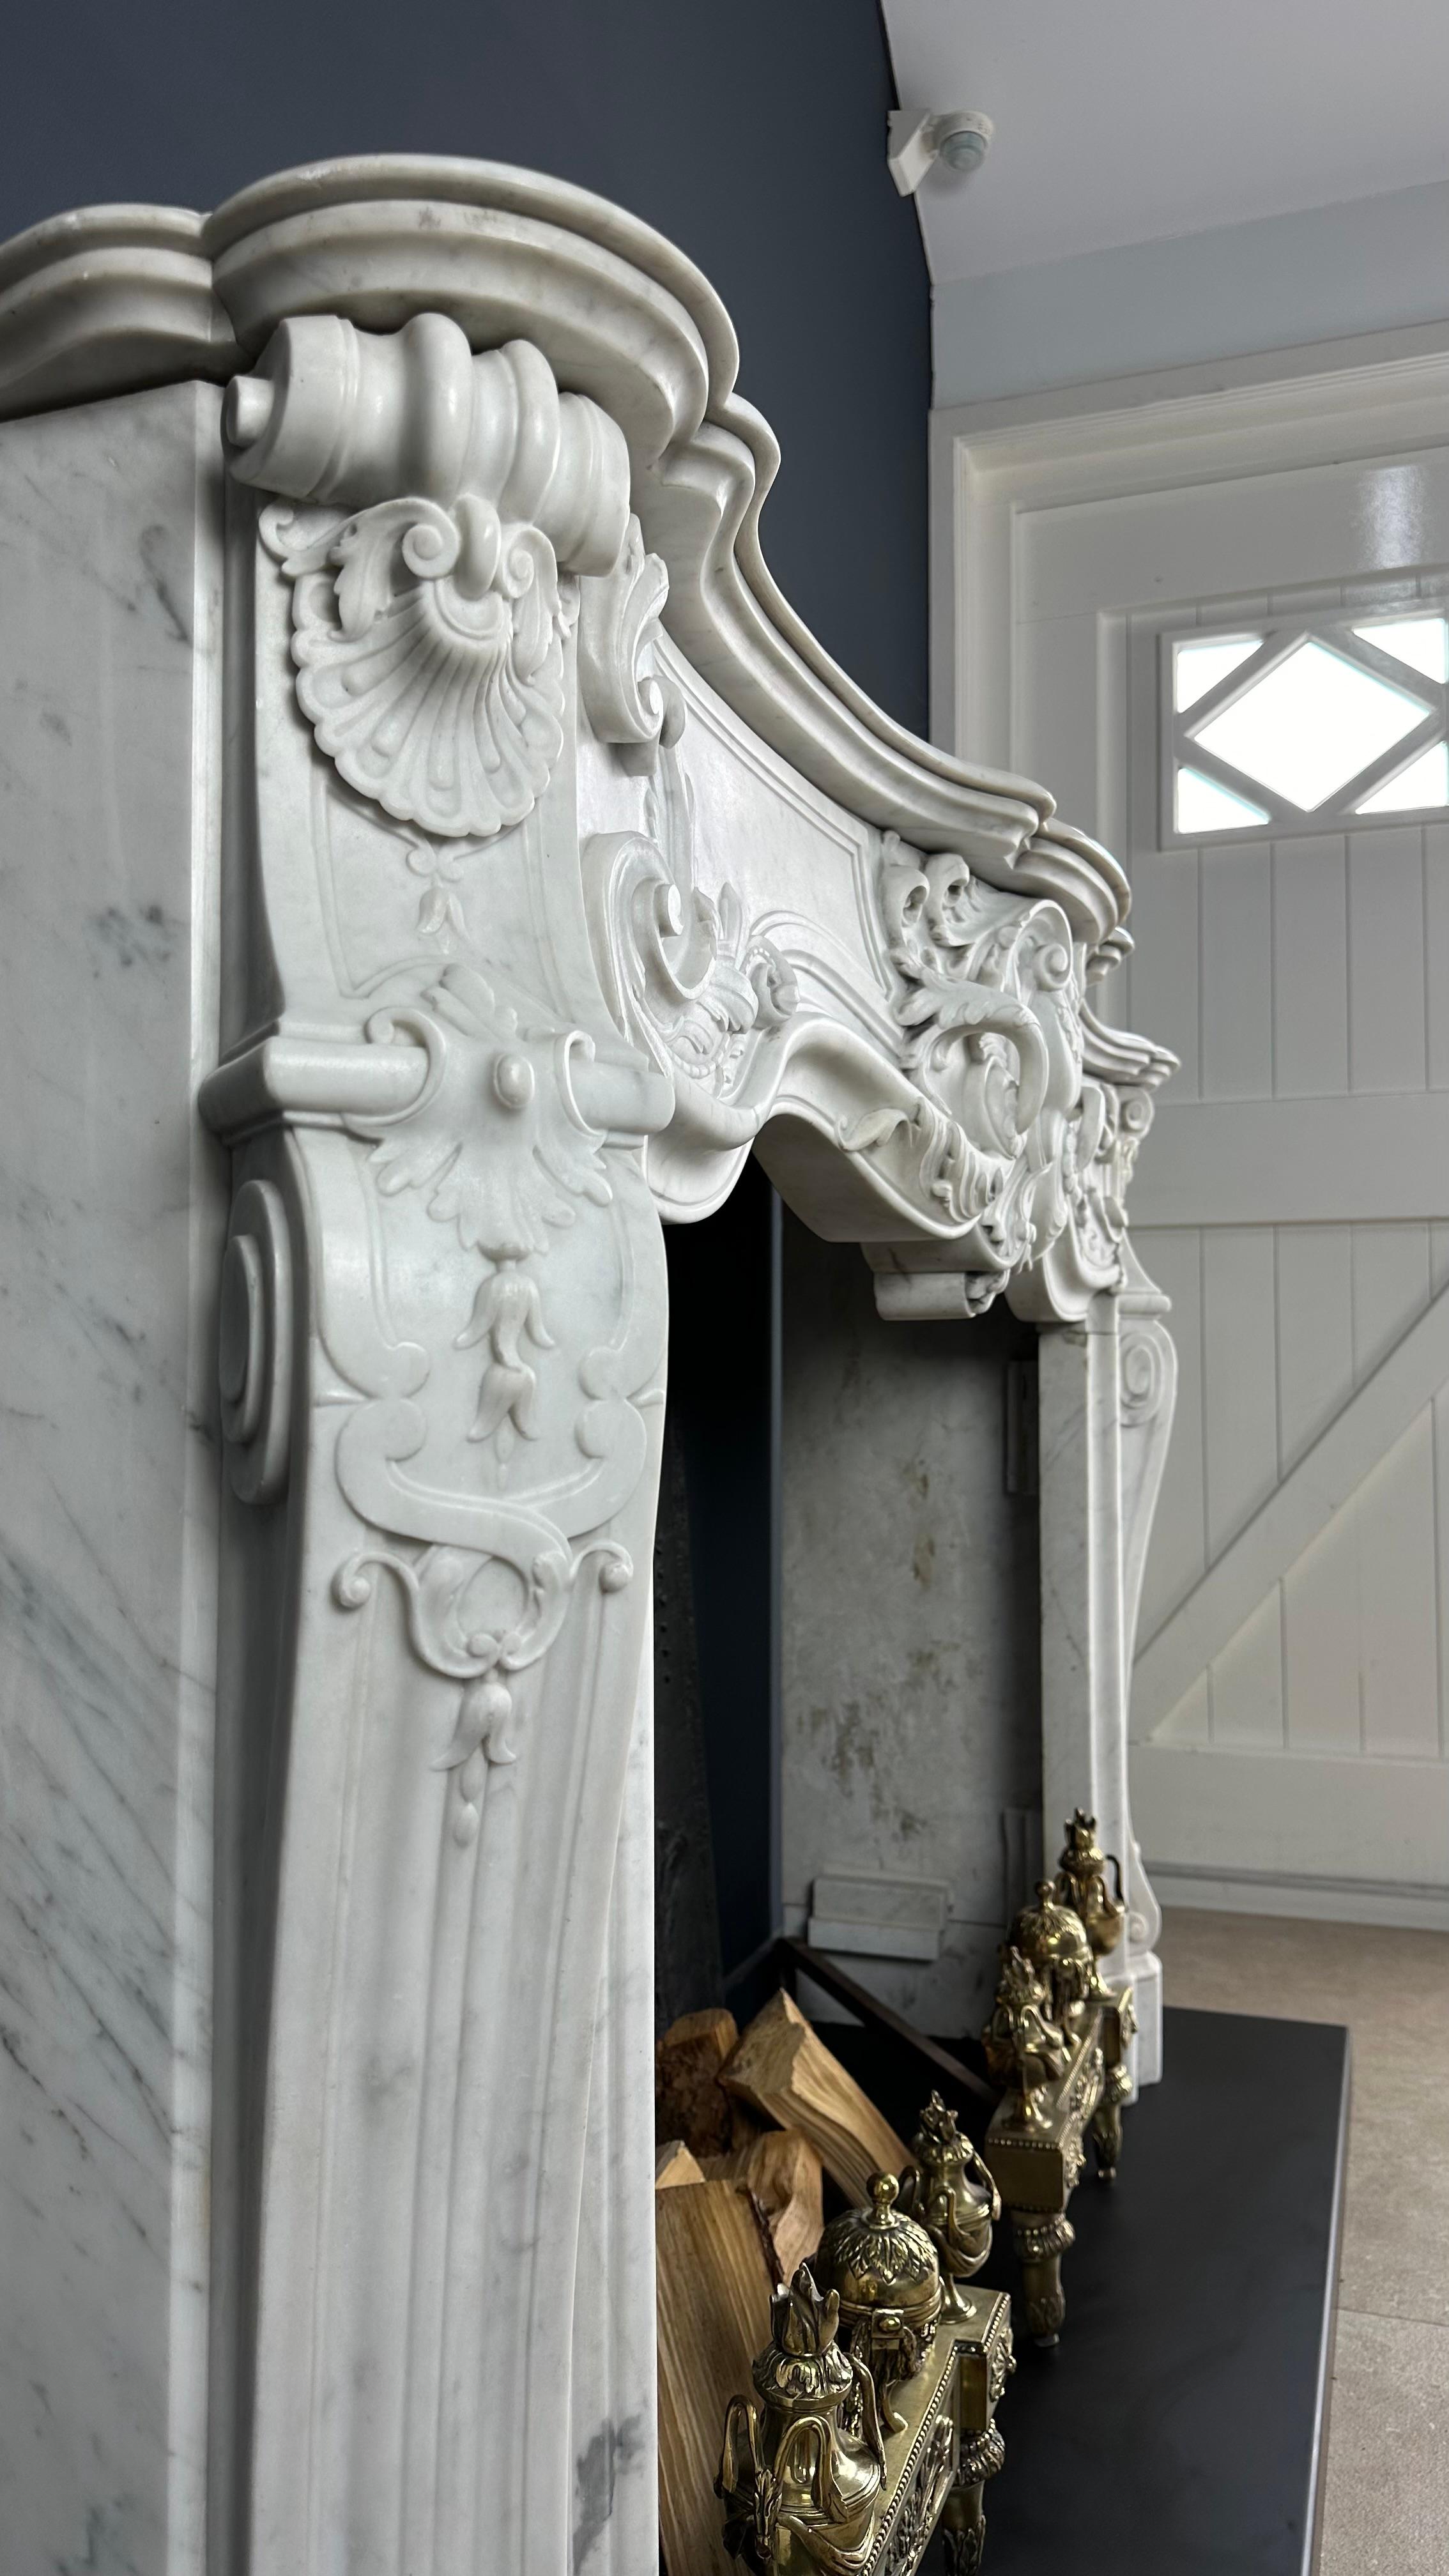 Masterful Elegance: Rare Antique Louis XV Carrara White Marble Fireplace

It's an exceptional privilege to witness a treasure like this emerge on the market, and I am proud to present this extraordinary fireplace as a valuable addition to any